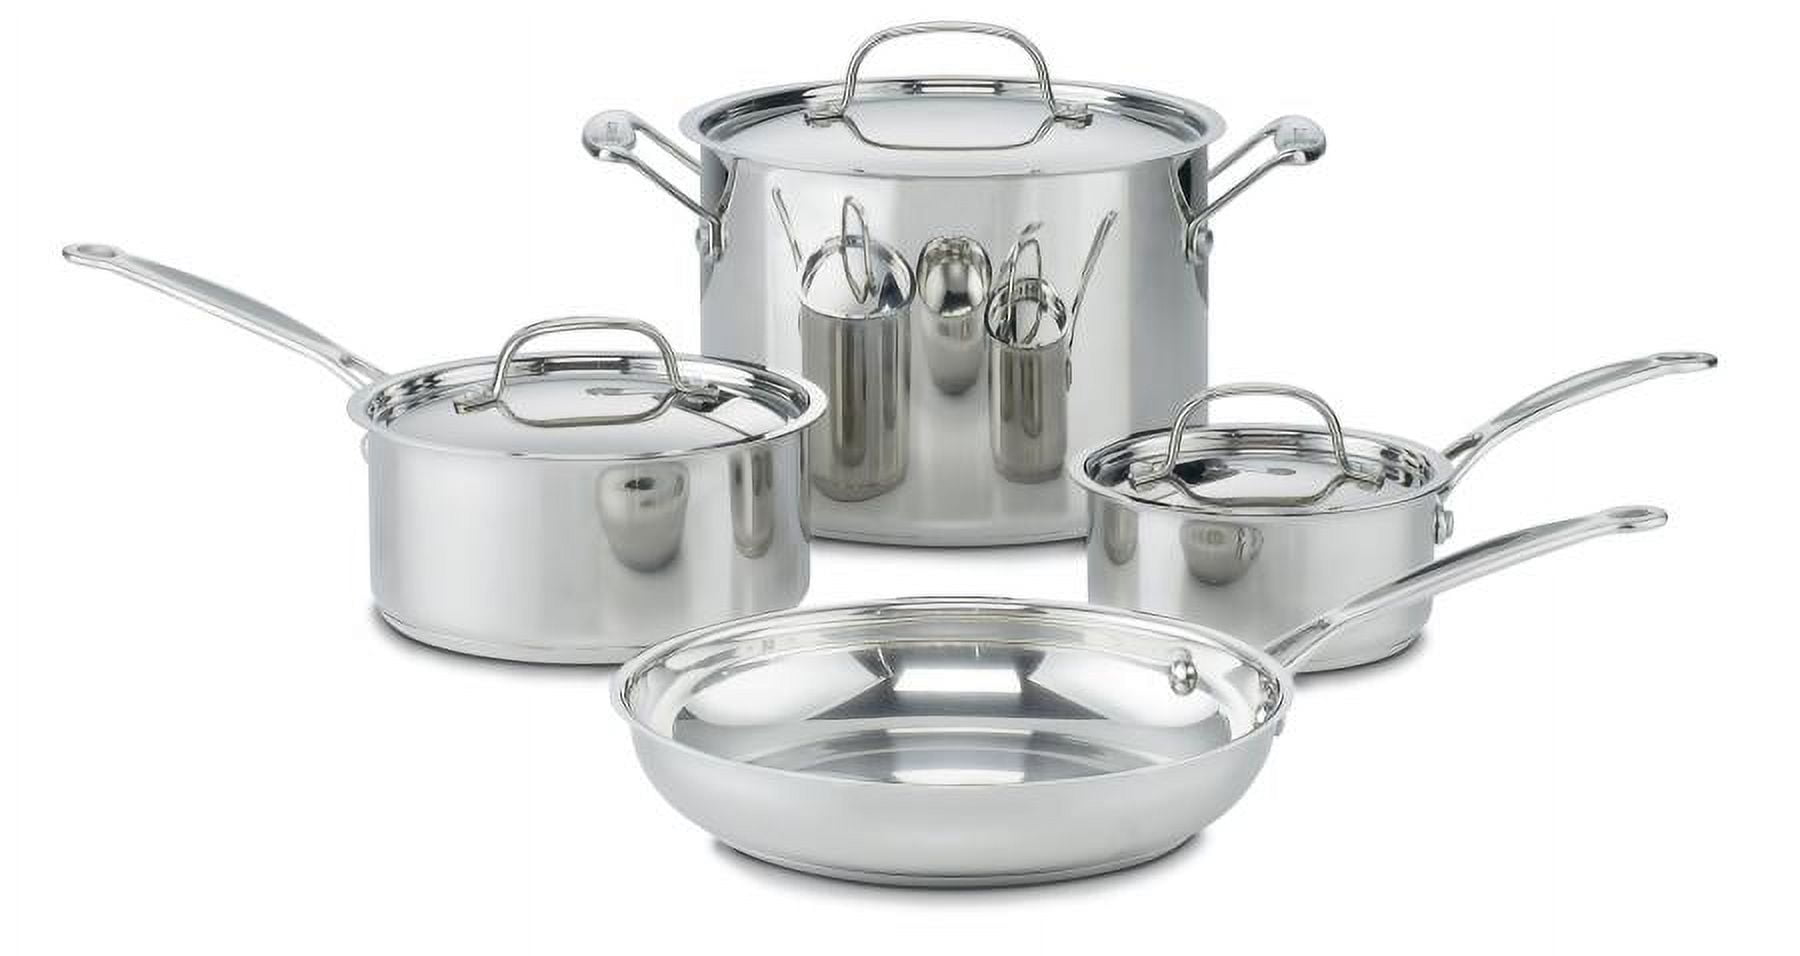 Cuisinart Chef's Classic Stainless Steel 7 Piece Cookware Set (77